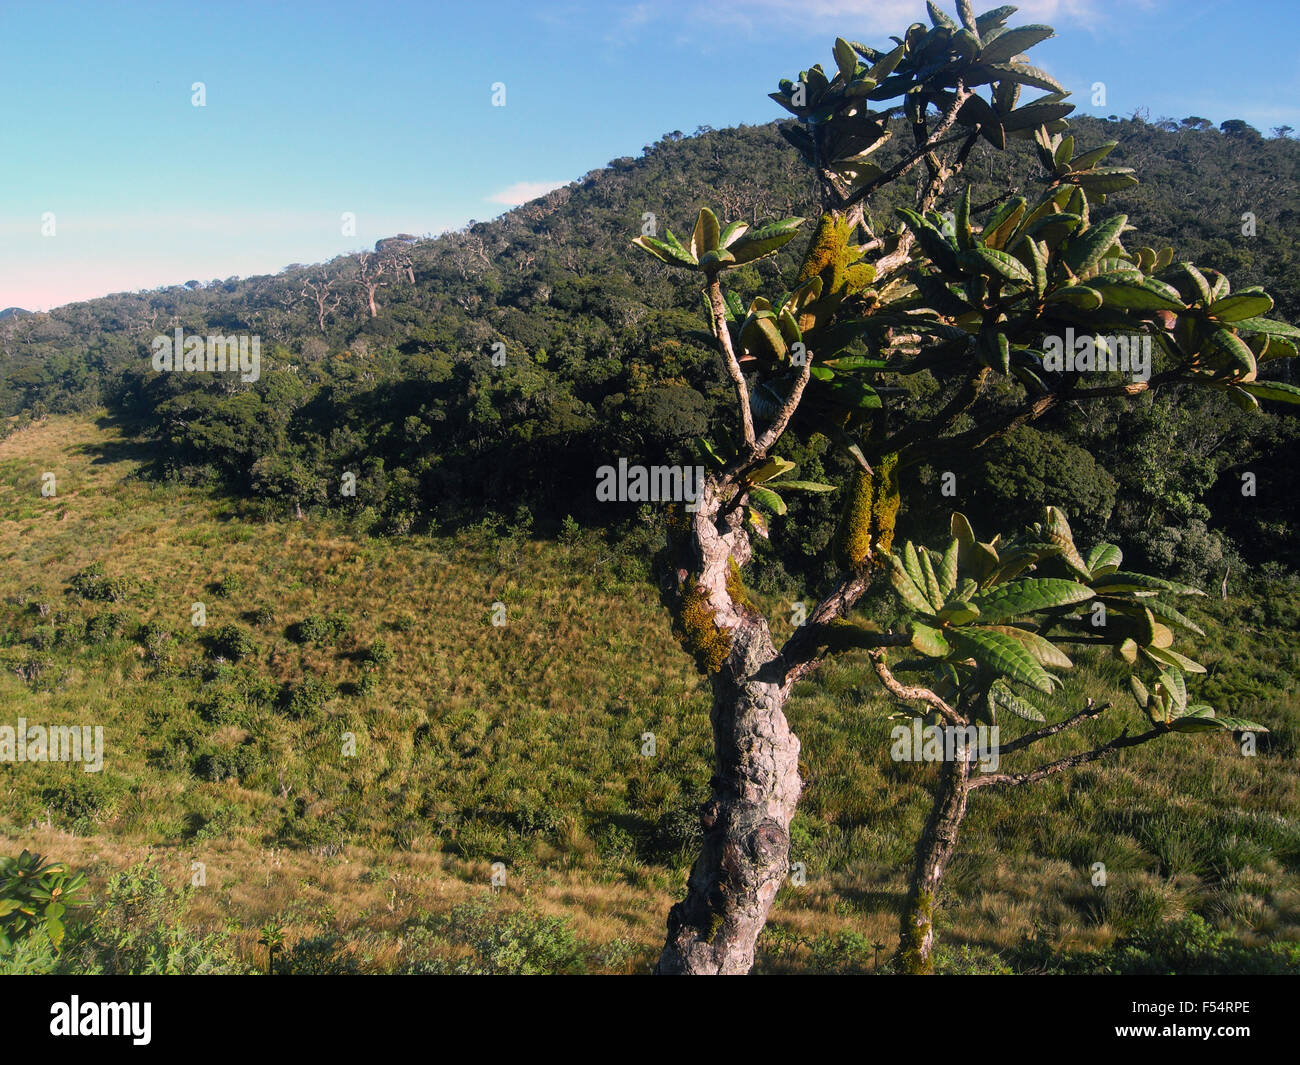 Gnarled old Rhododendron tree with mosses, Horton's Plains National Park, Sri Lanka Stock Photo